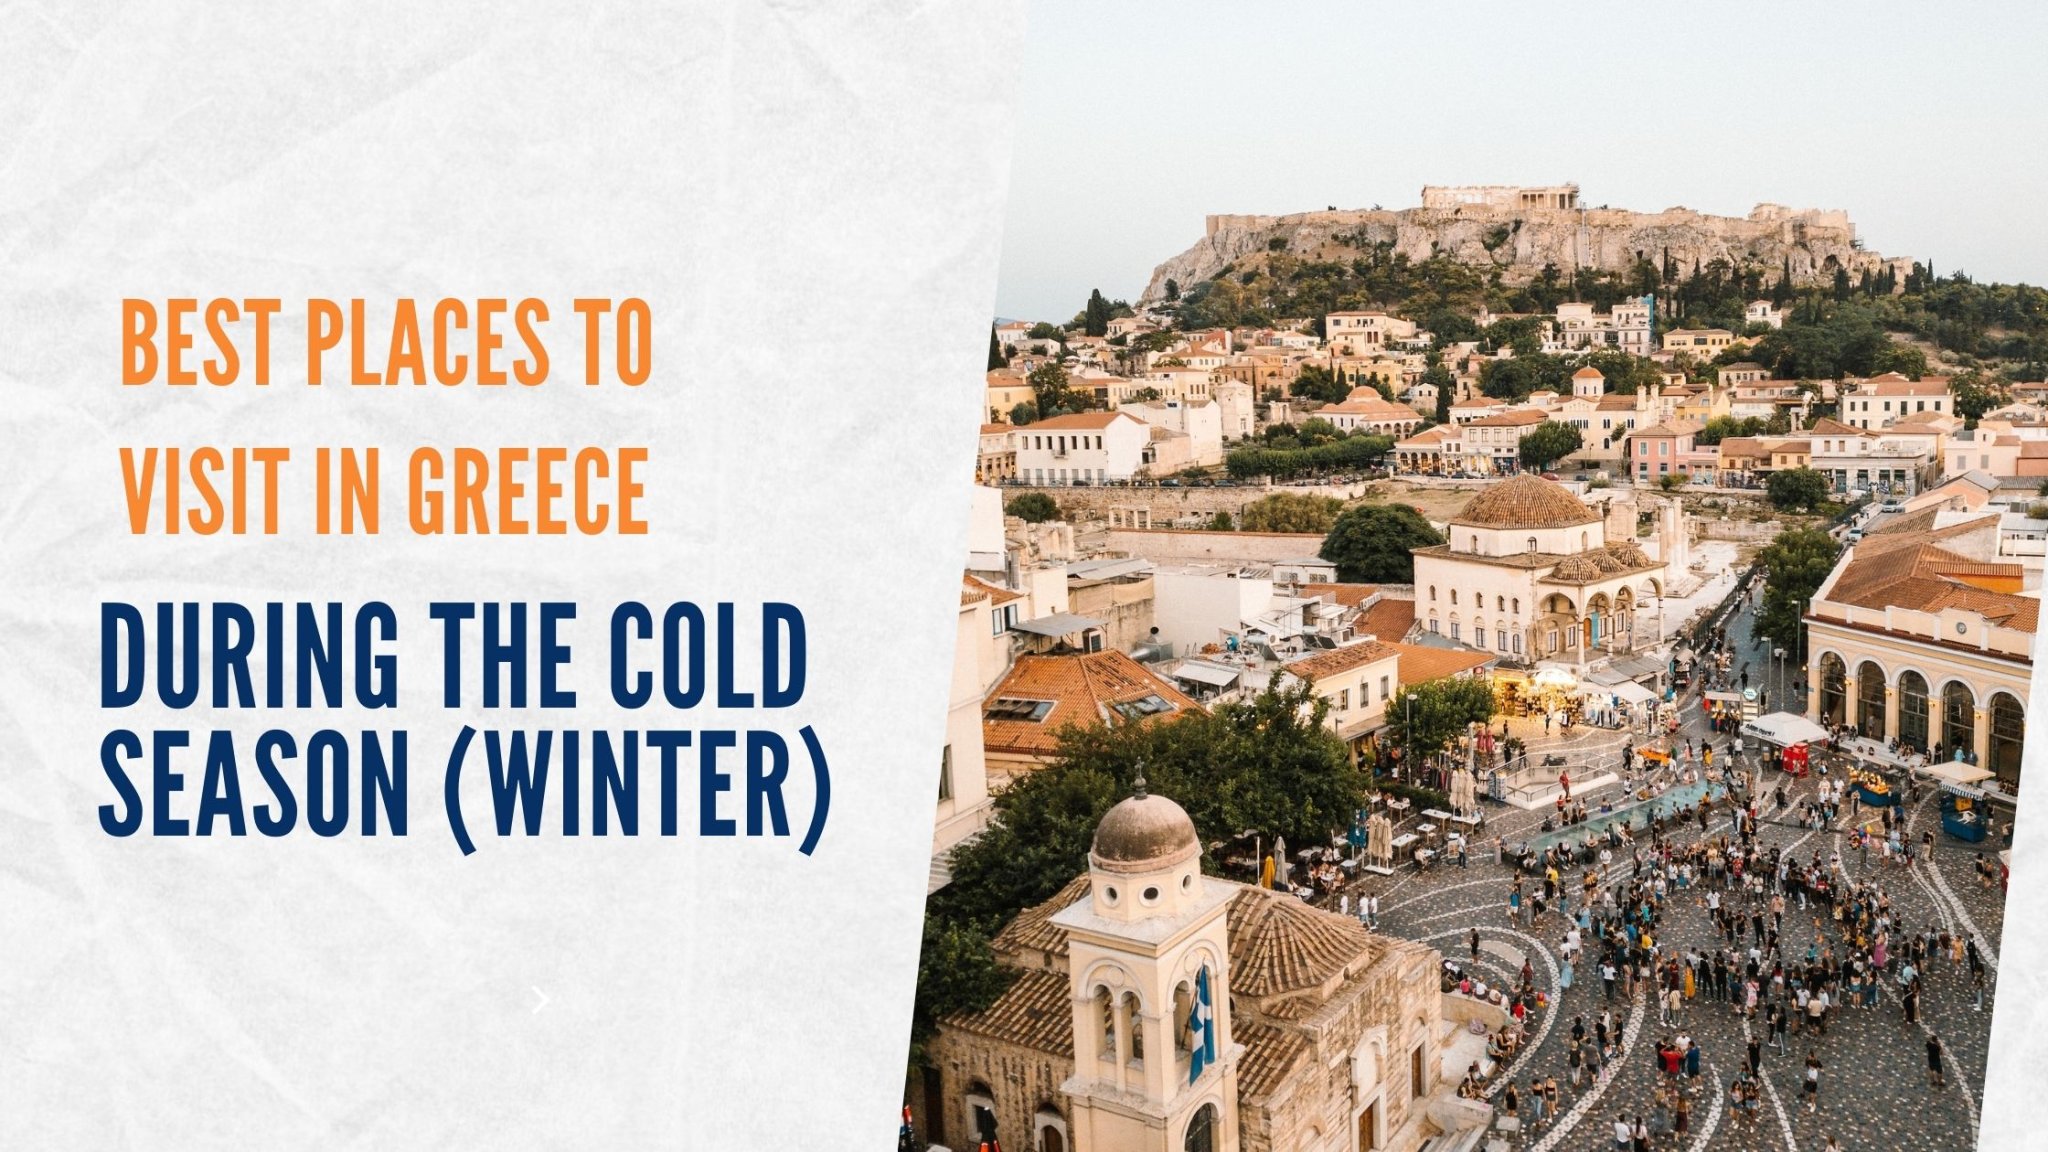 Best Places to Visit in Greece during the Cold Season (Winter) | LooknWalk Greece